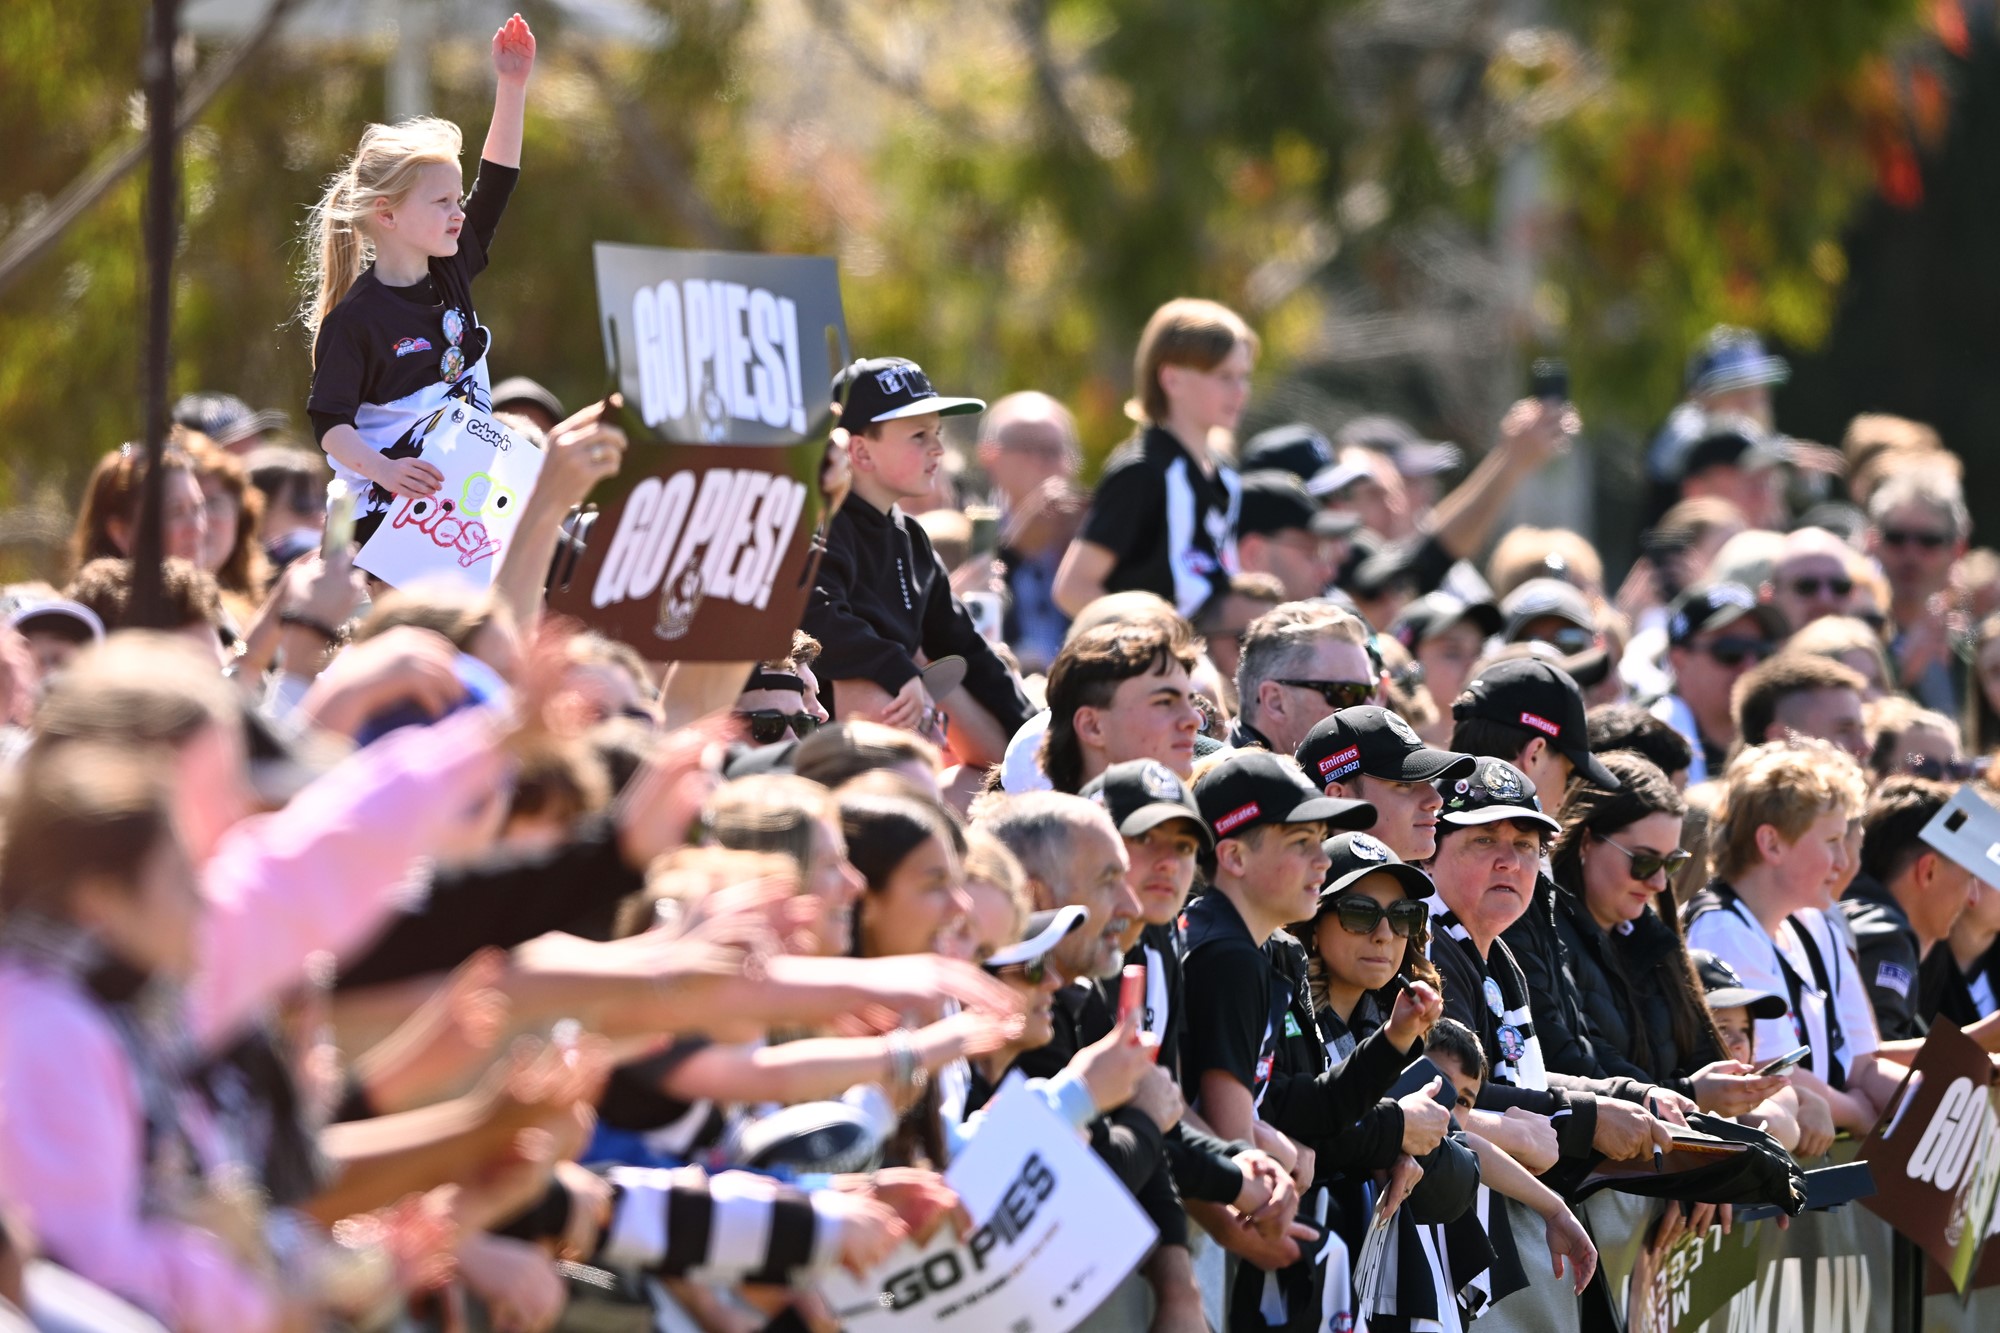 Coolingwood fans decked out in black and white with signs gather at a previous open training session.